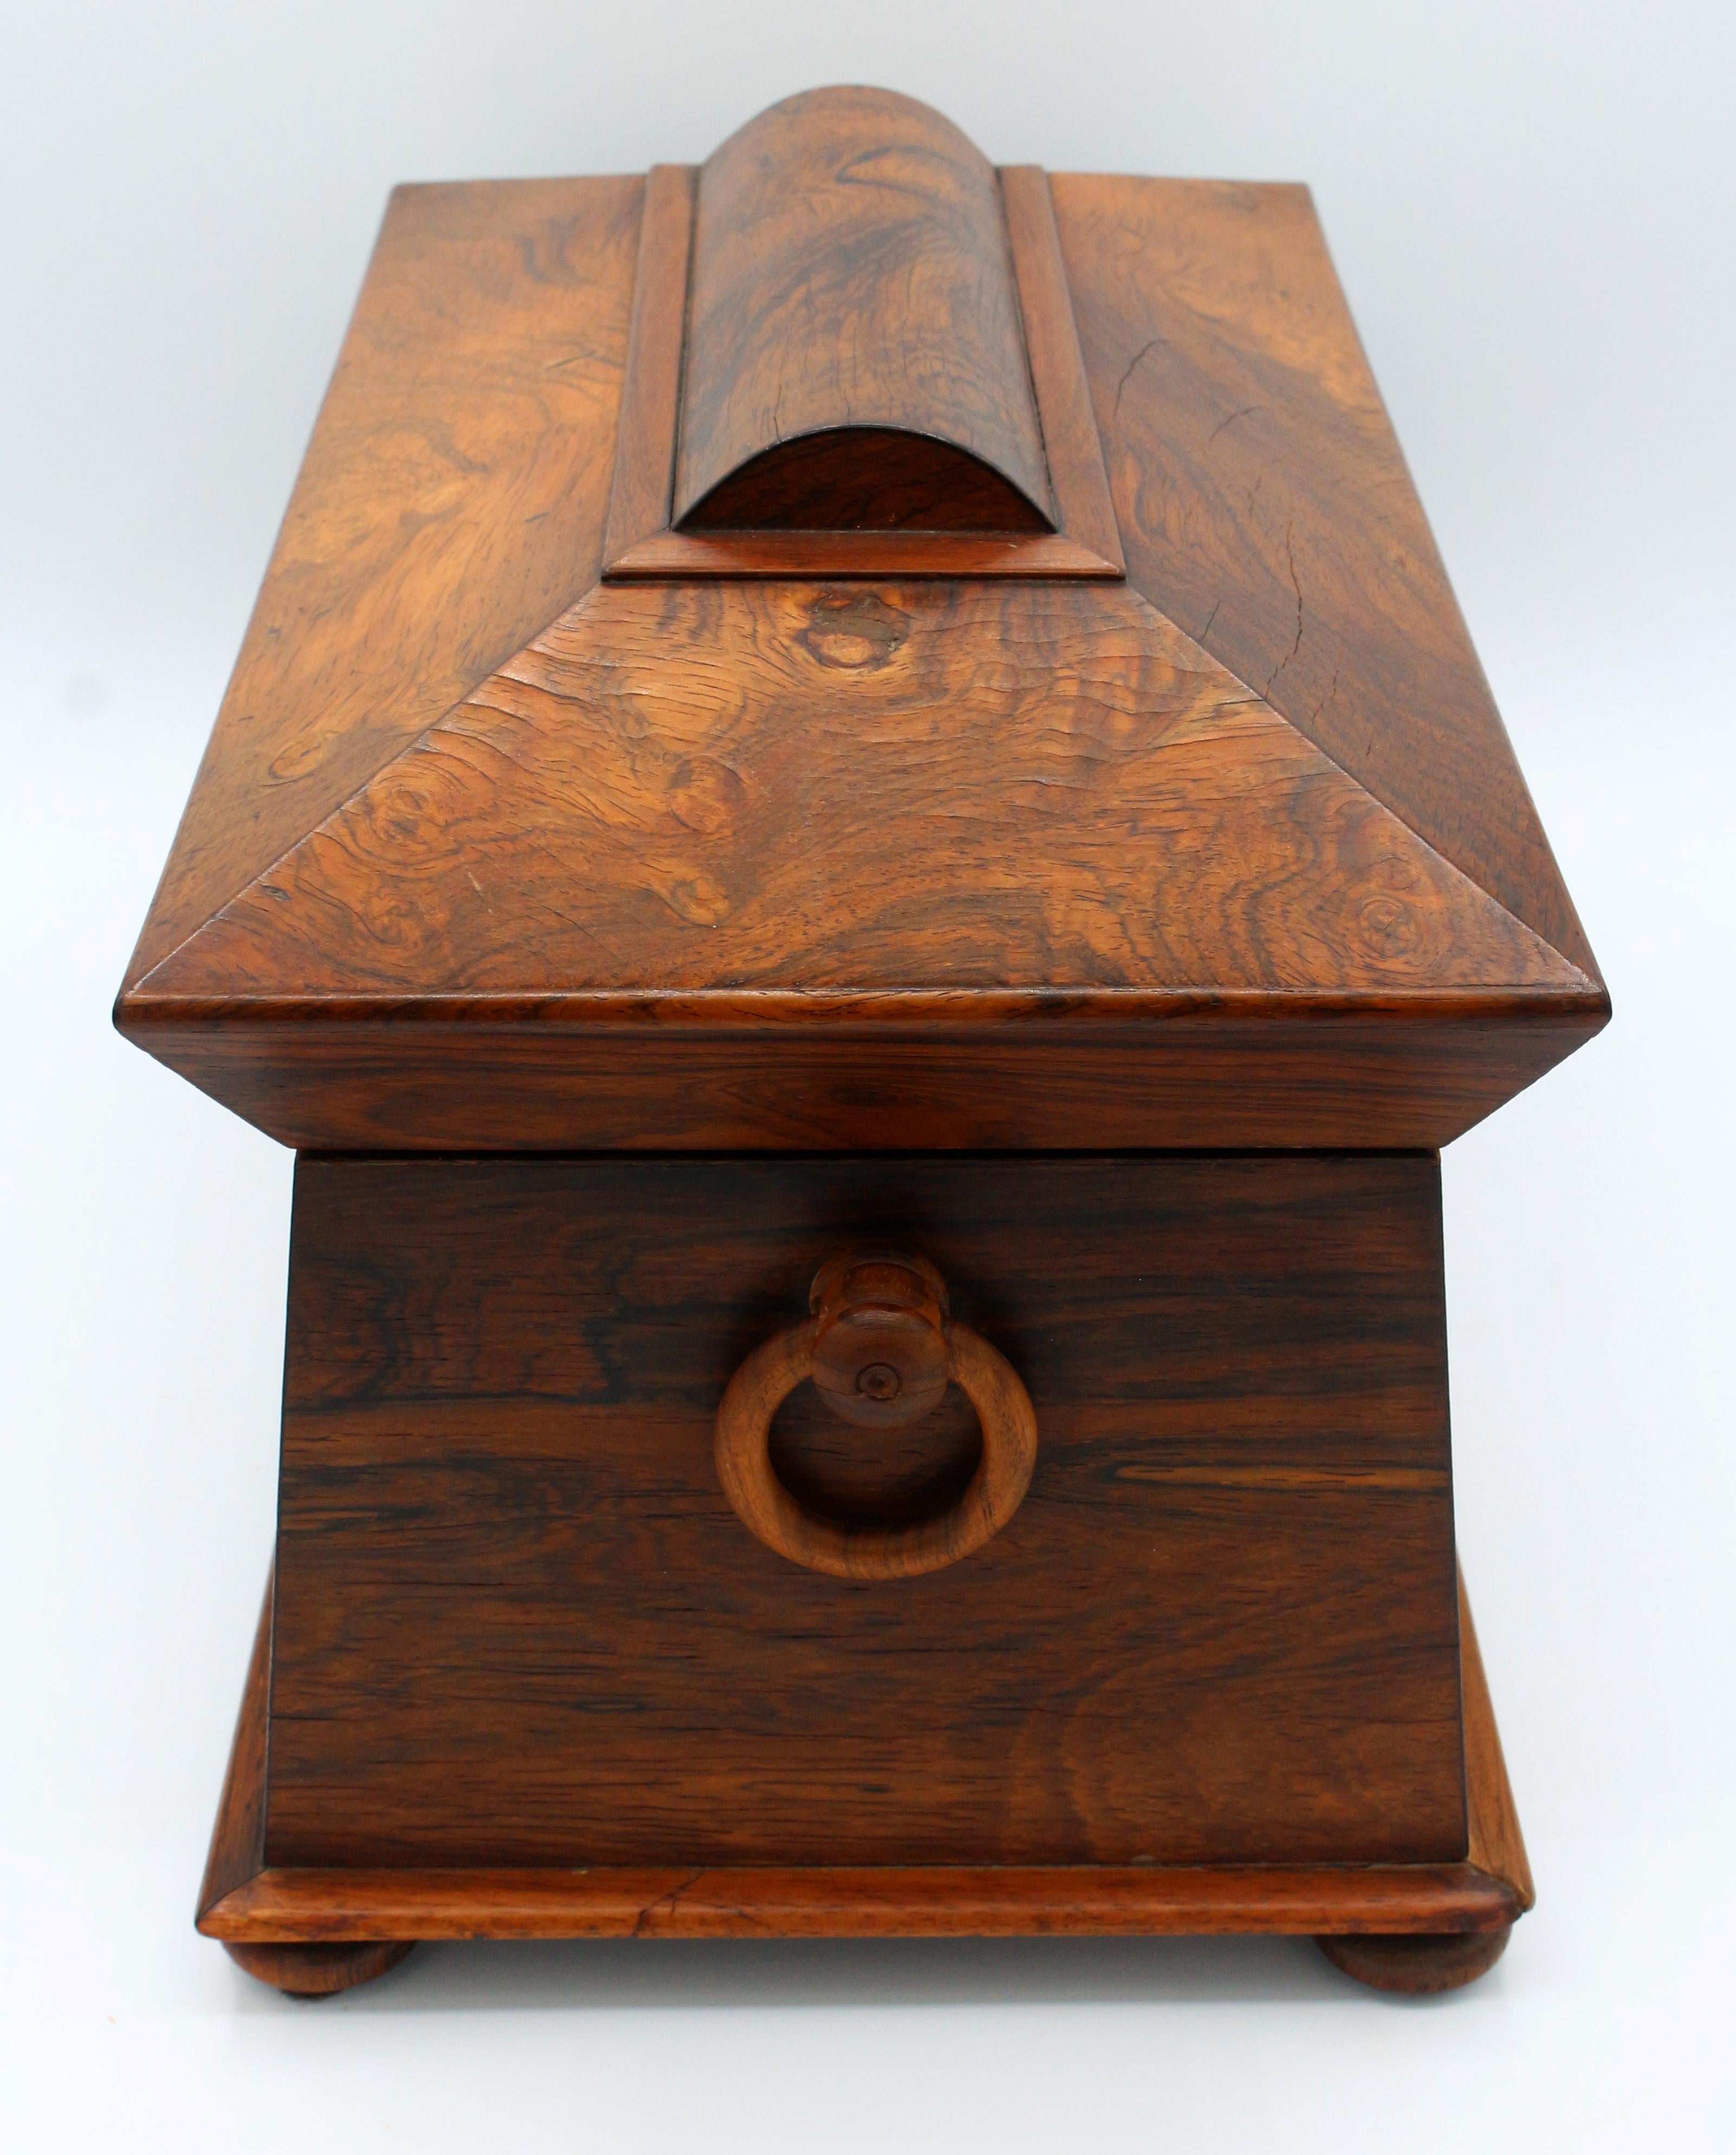 William IV period sarcophagus form tea caddy, English, circa 1830. Original interior fitted with a pair of dome-top tea canisters and section for sugar bowl (bowl lacking). Original treen ring handles & button feet.
13 5/8